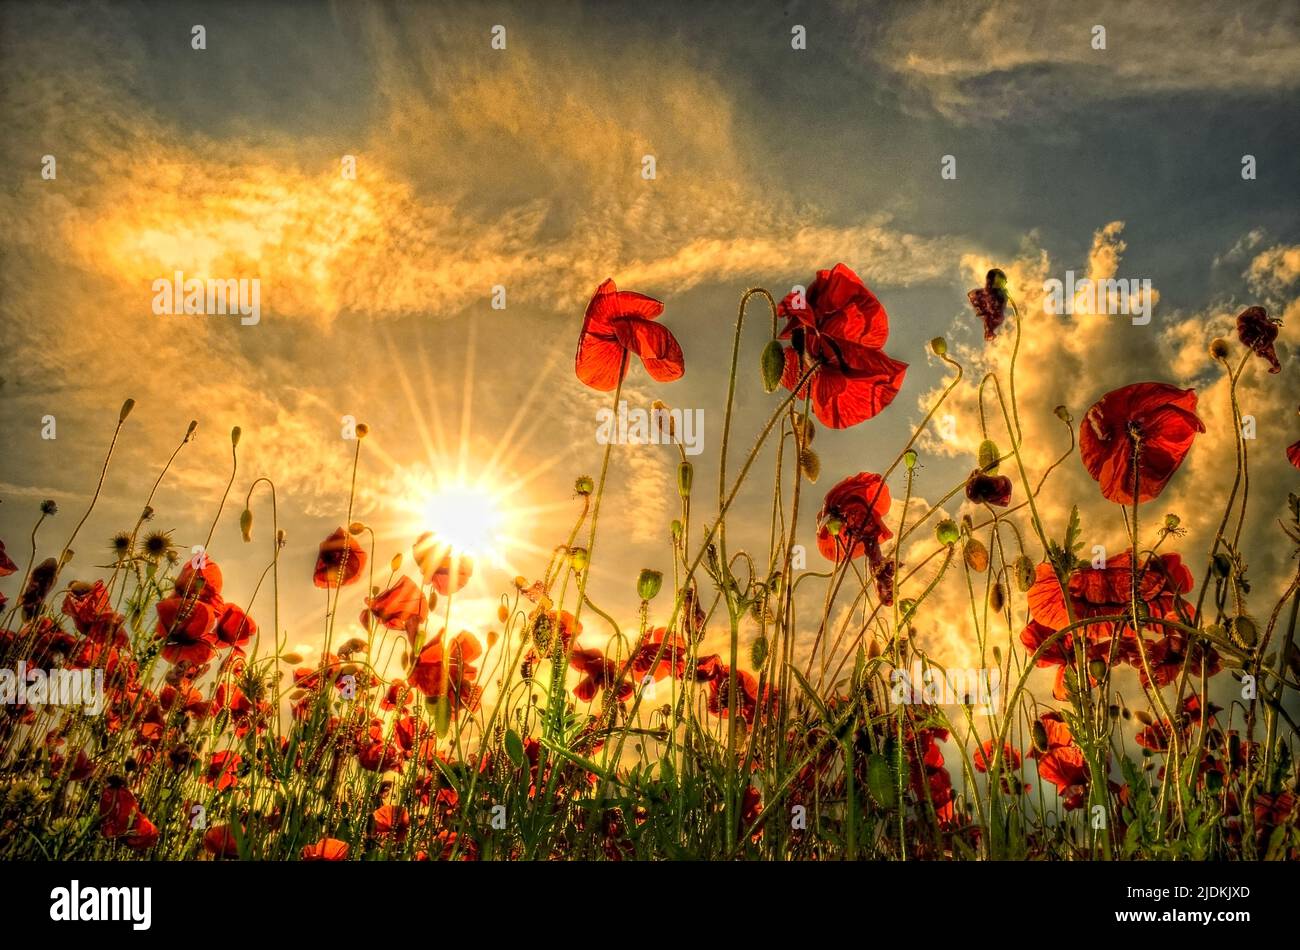 Sunset with red poppies in a field Stock Photo